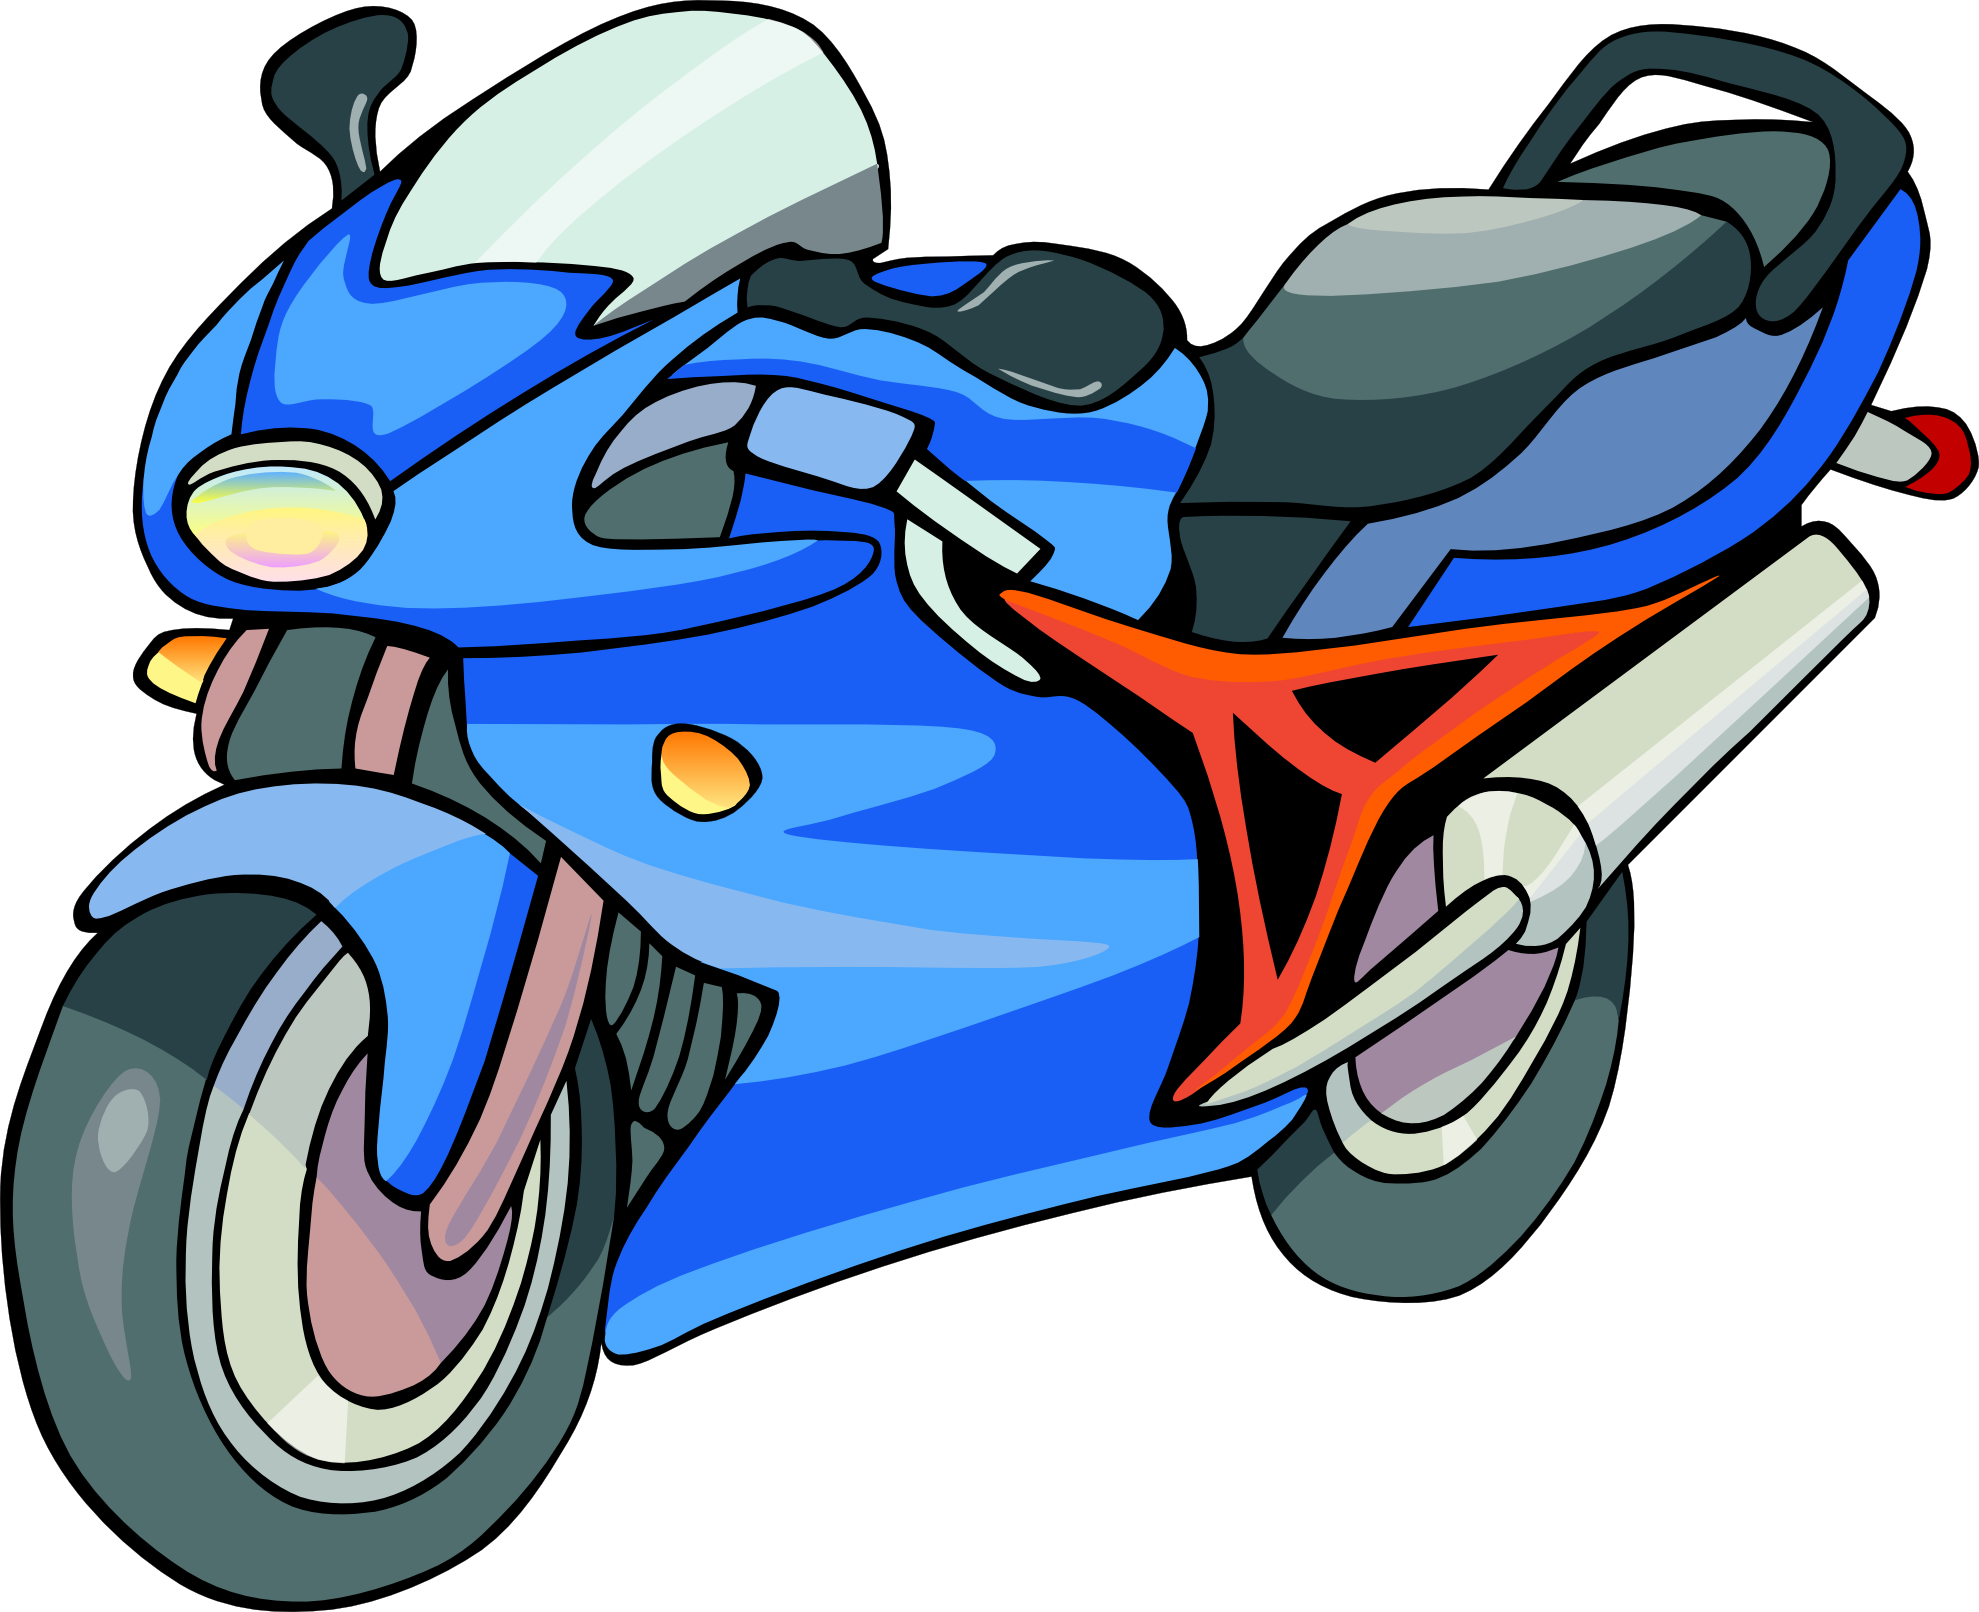 Free images motorcycles.